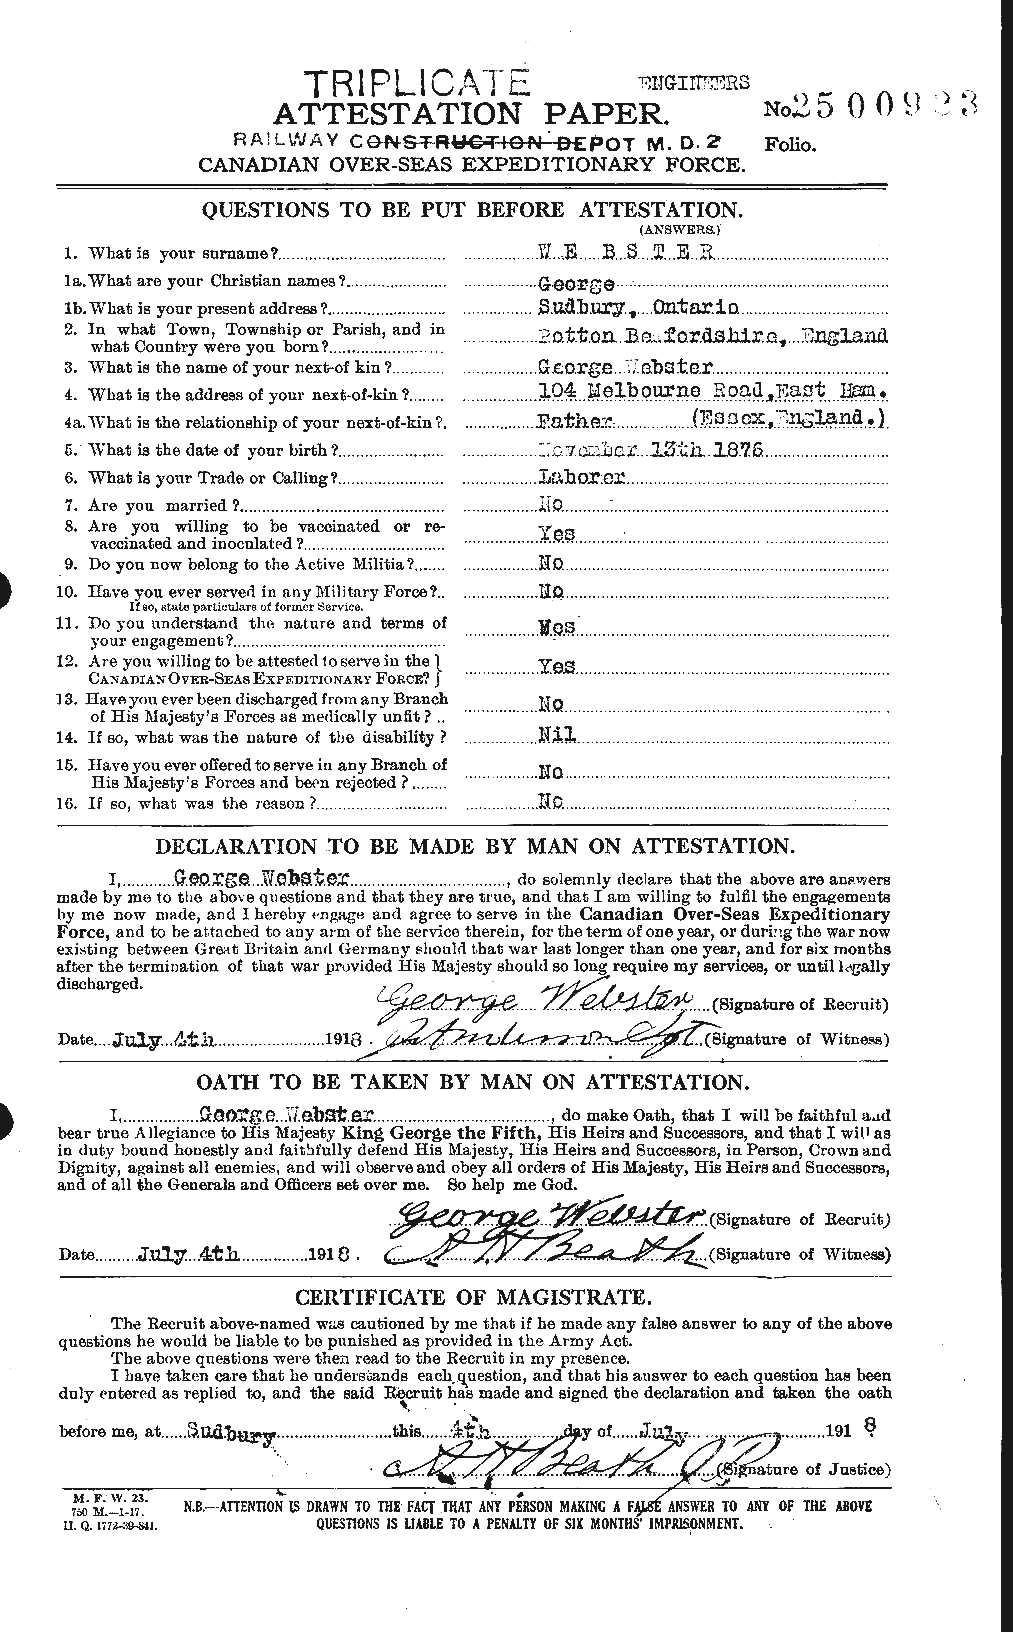 Personnel Records of the First World War - CEF 670379a